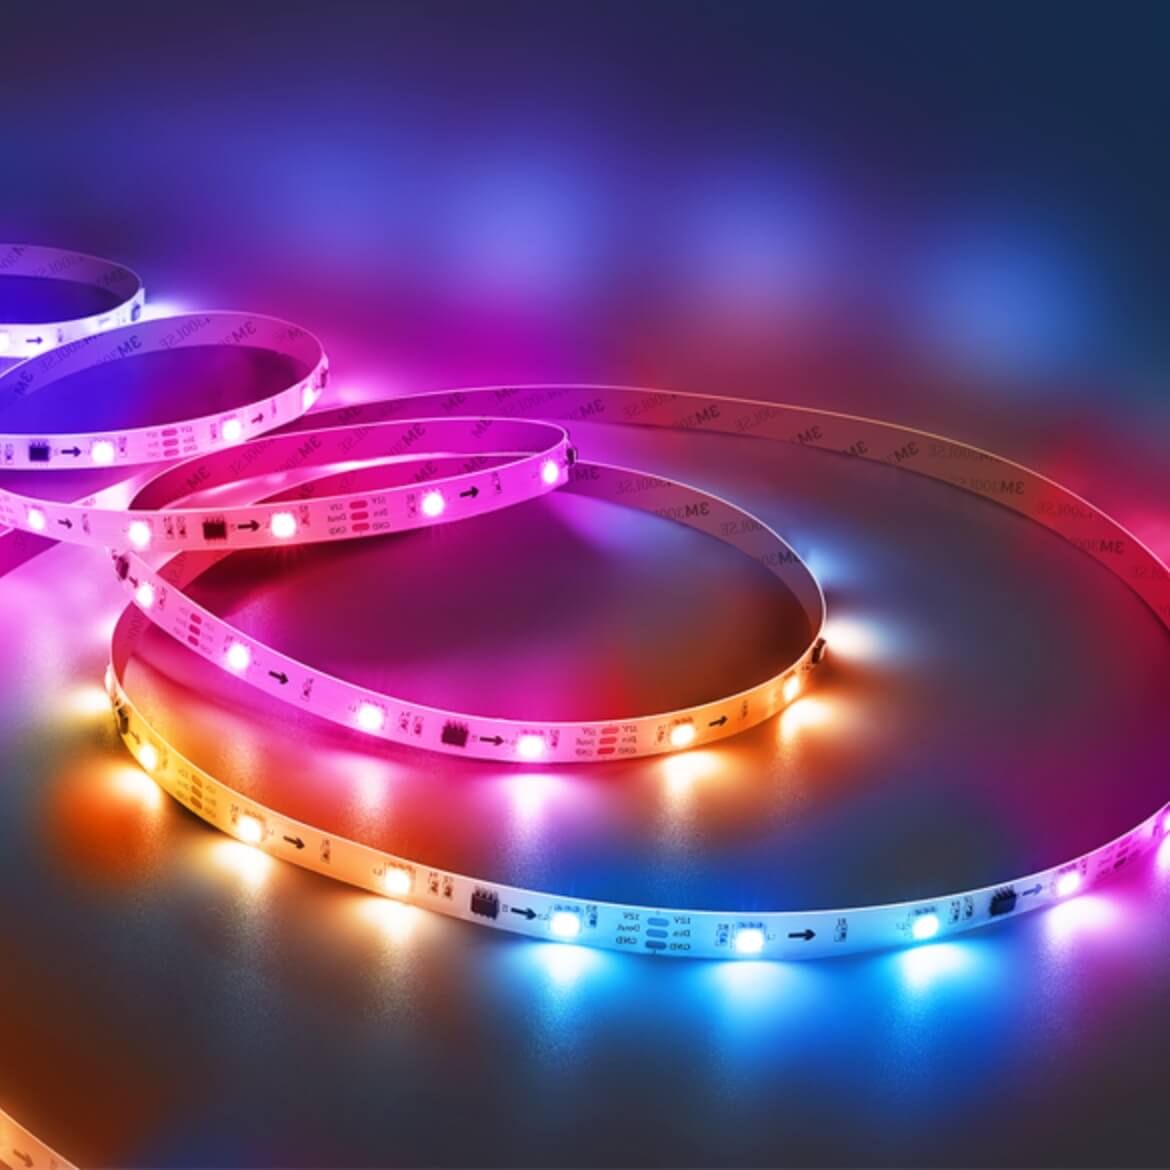 Govee RGBIC LED Strip Lights With Protective Coating 5 metros